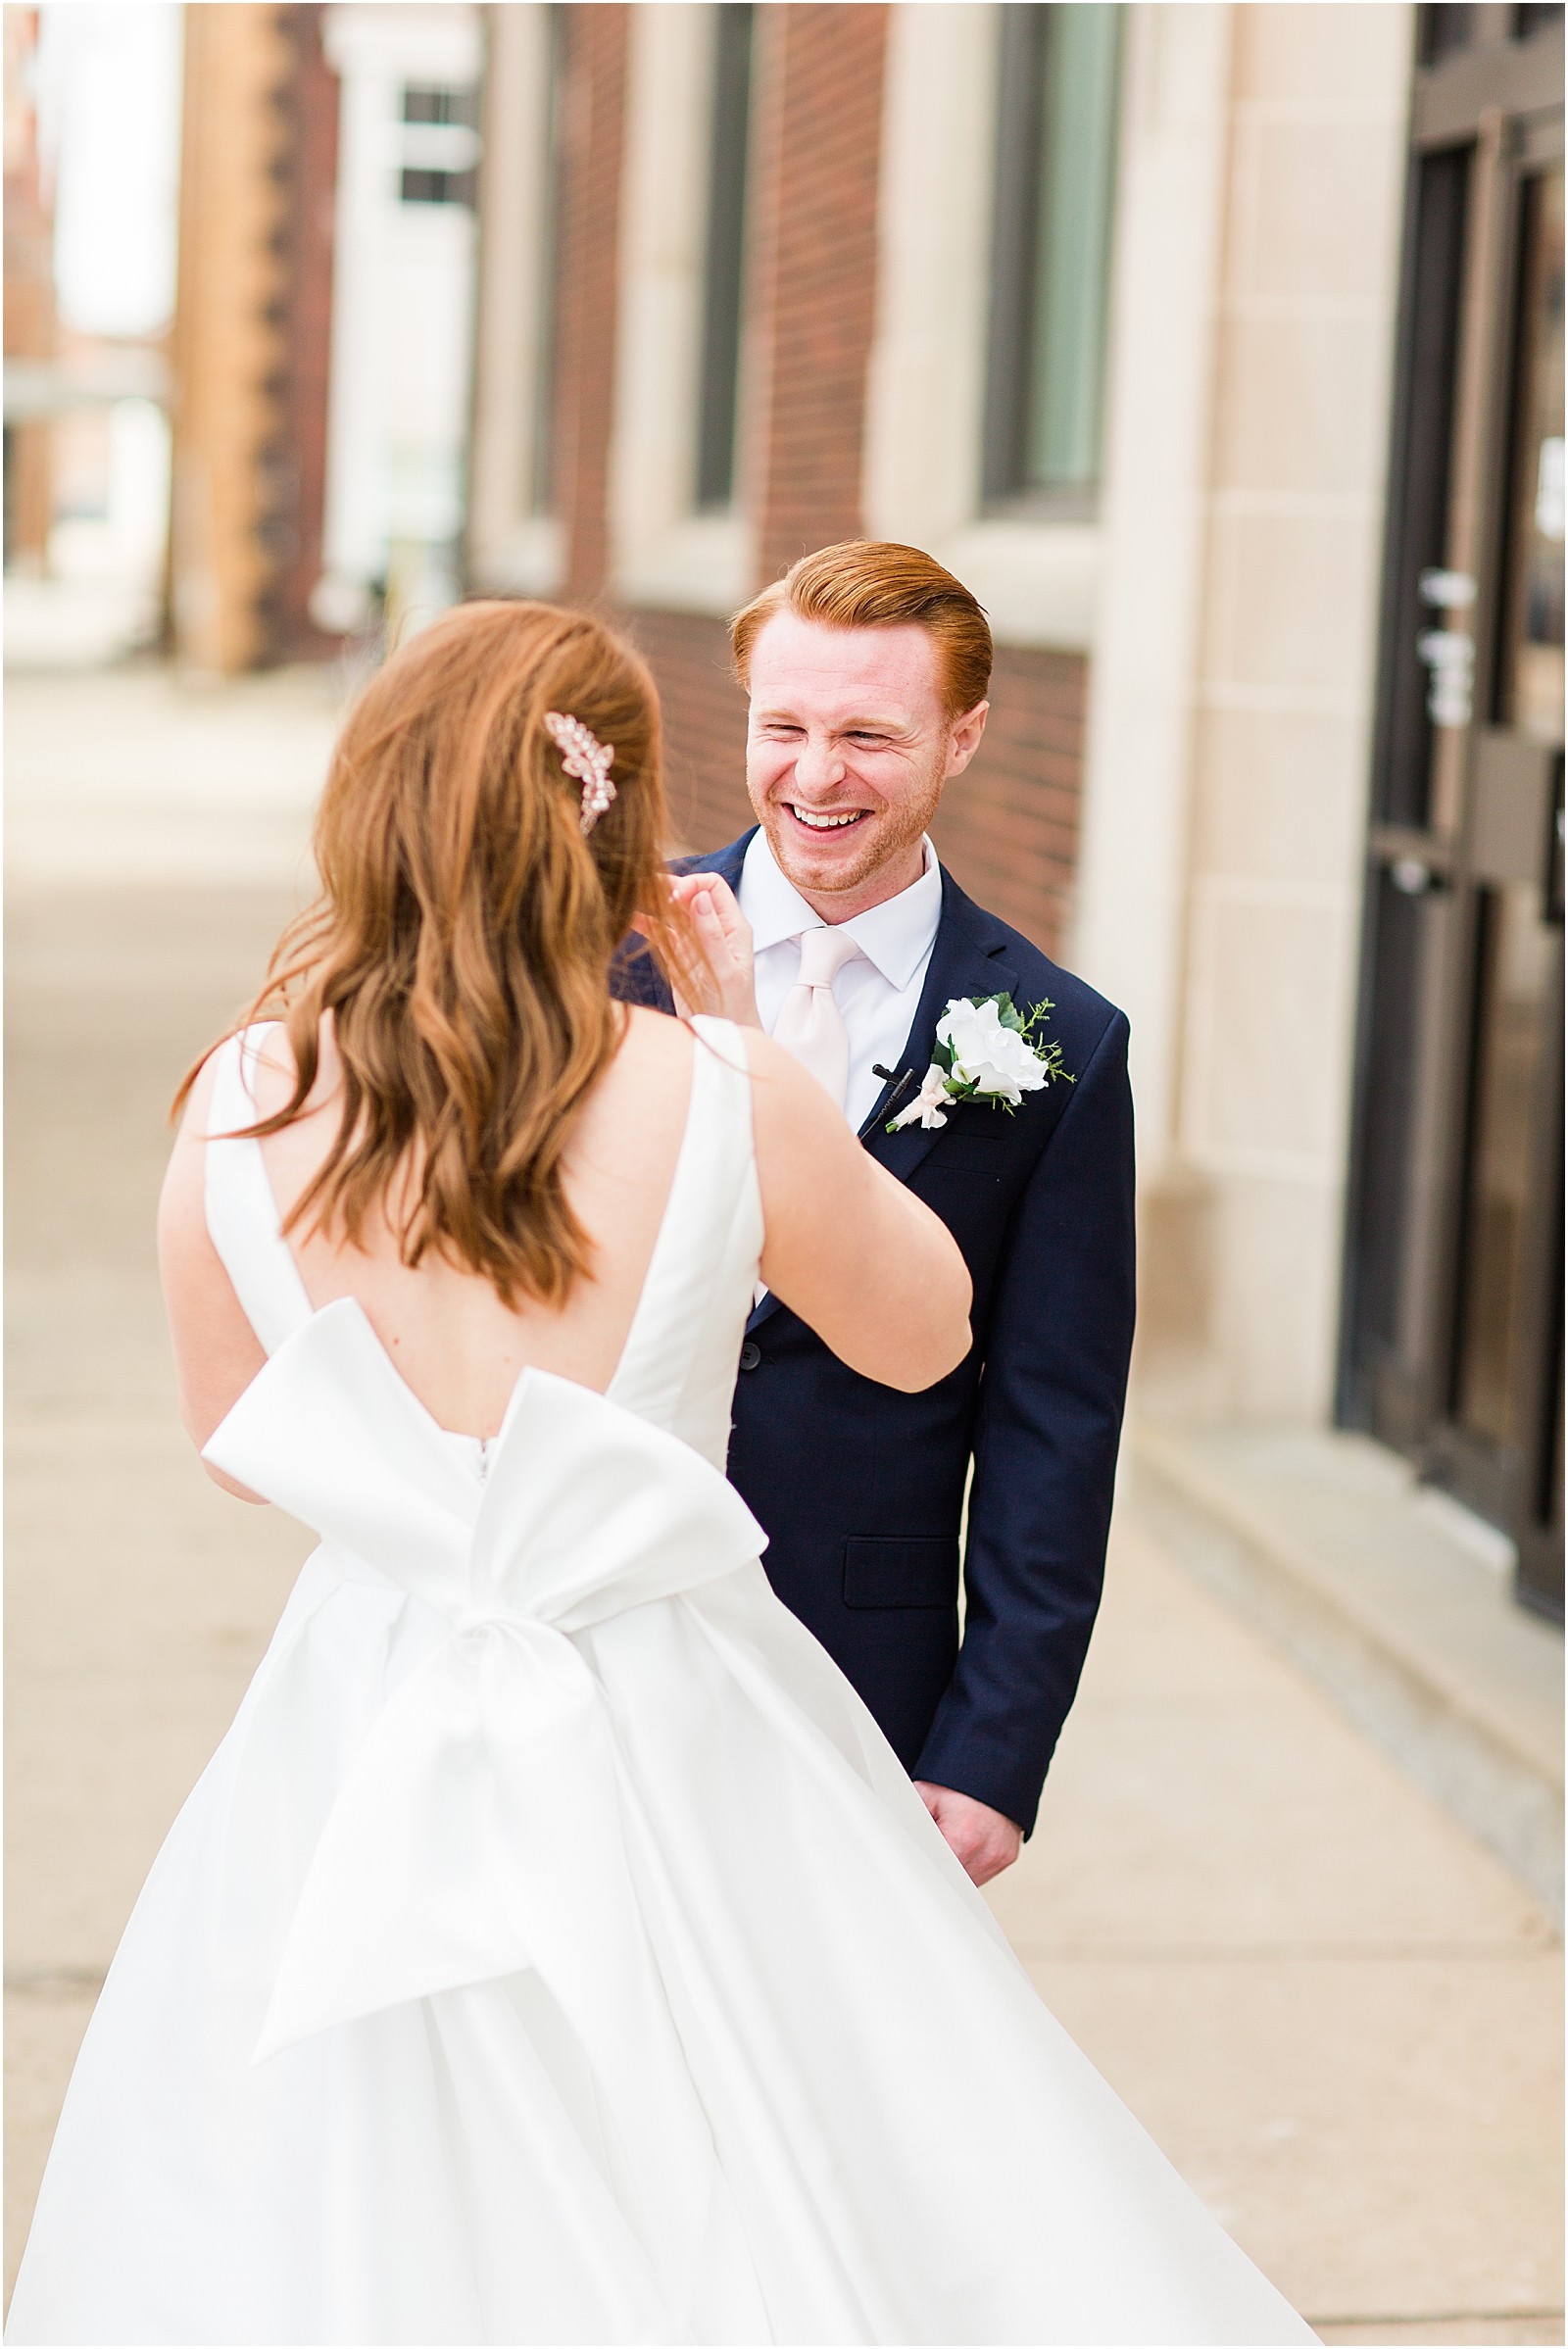 A Perfectly Intimate Wedding in Downtown Evansville Indiana | Jennah and Steve | Bret and Brandie Photography | | 0046.jpg